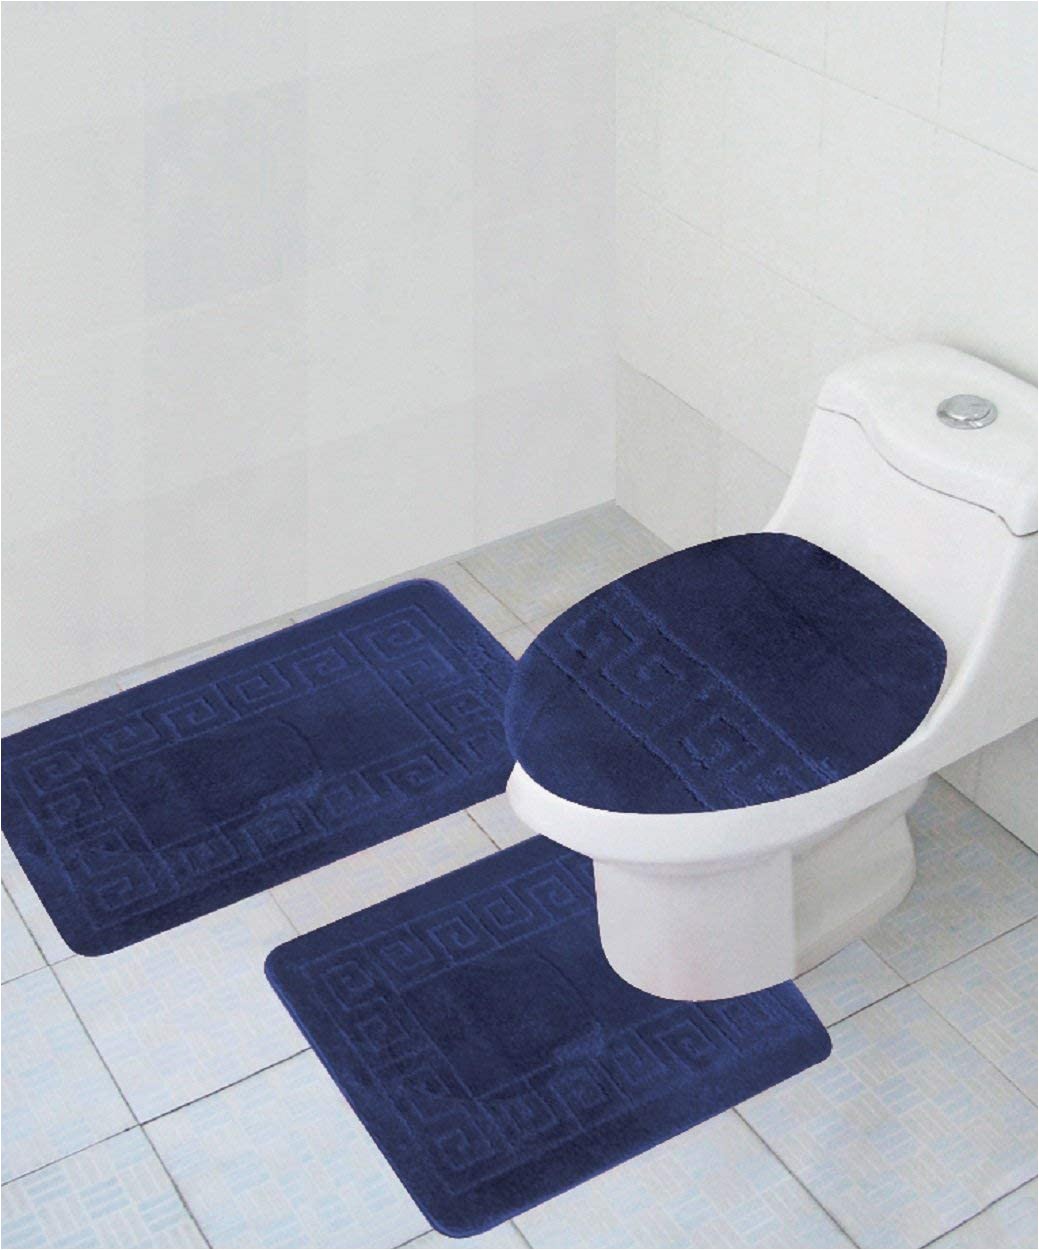 Bath Rug Sets with Elongated Lid Cover 3 Piece Bath Rug Set Pattern Bathroom Rug 20"x32" Contour Mat 20"x20" with Lid Cover Sky Blue